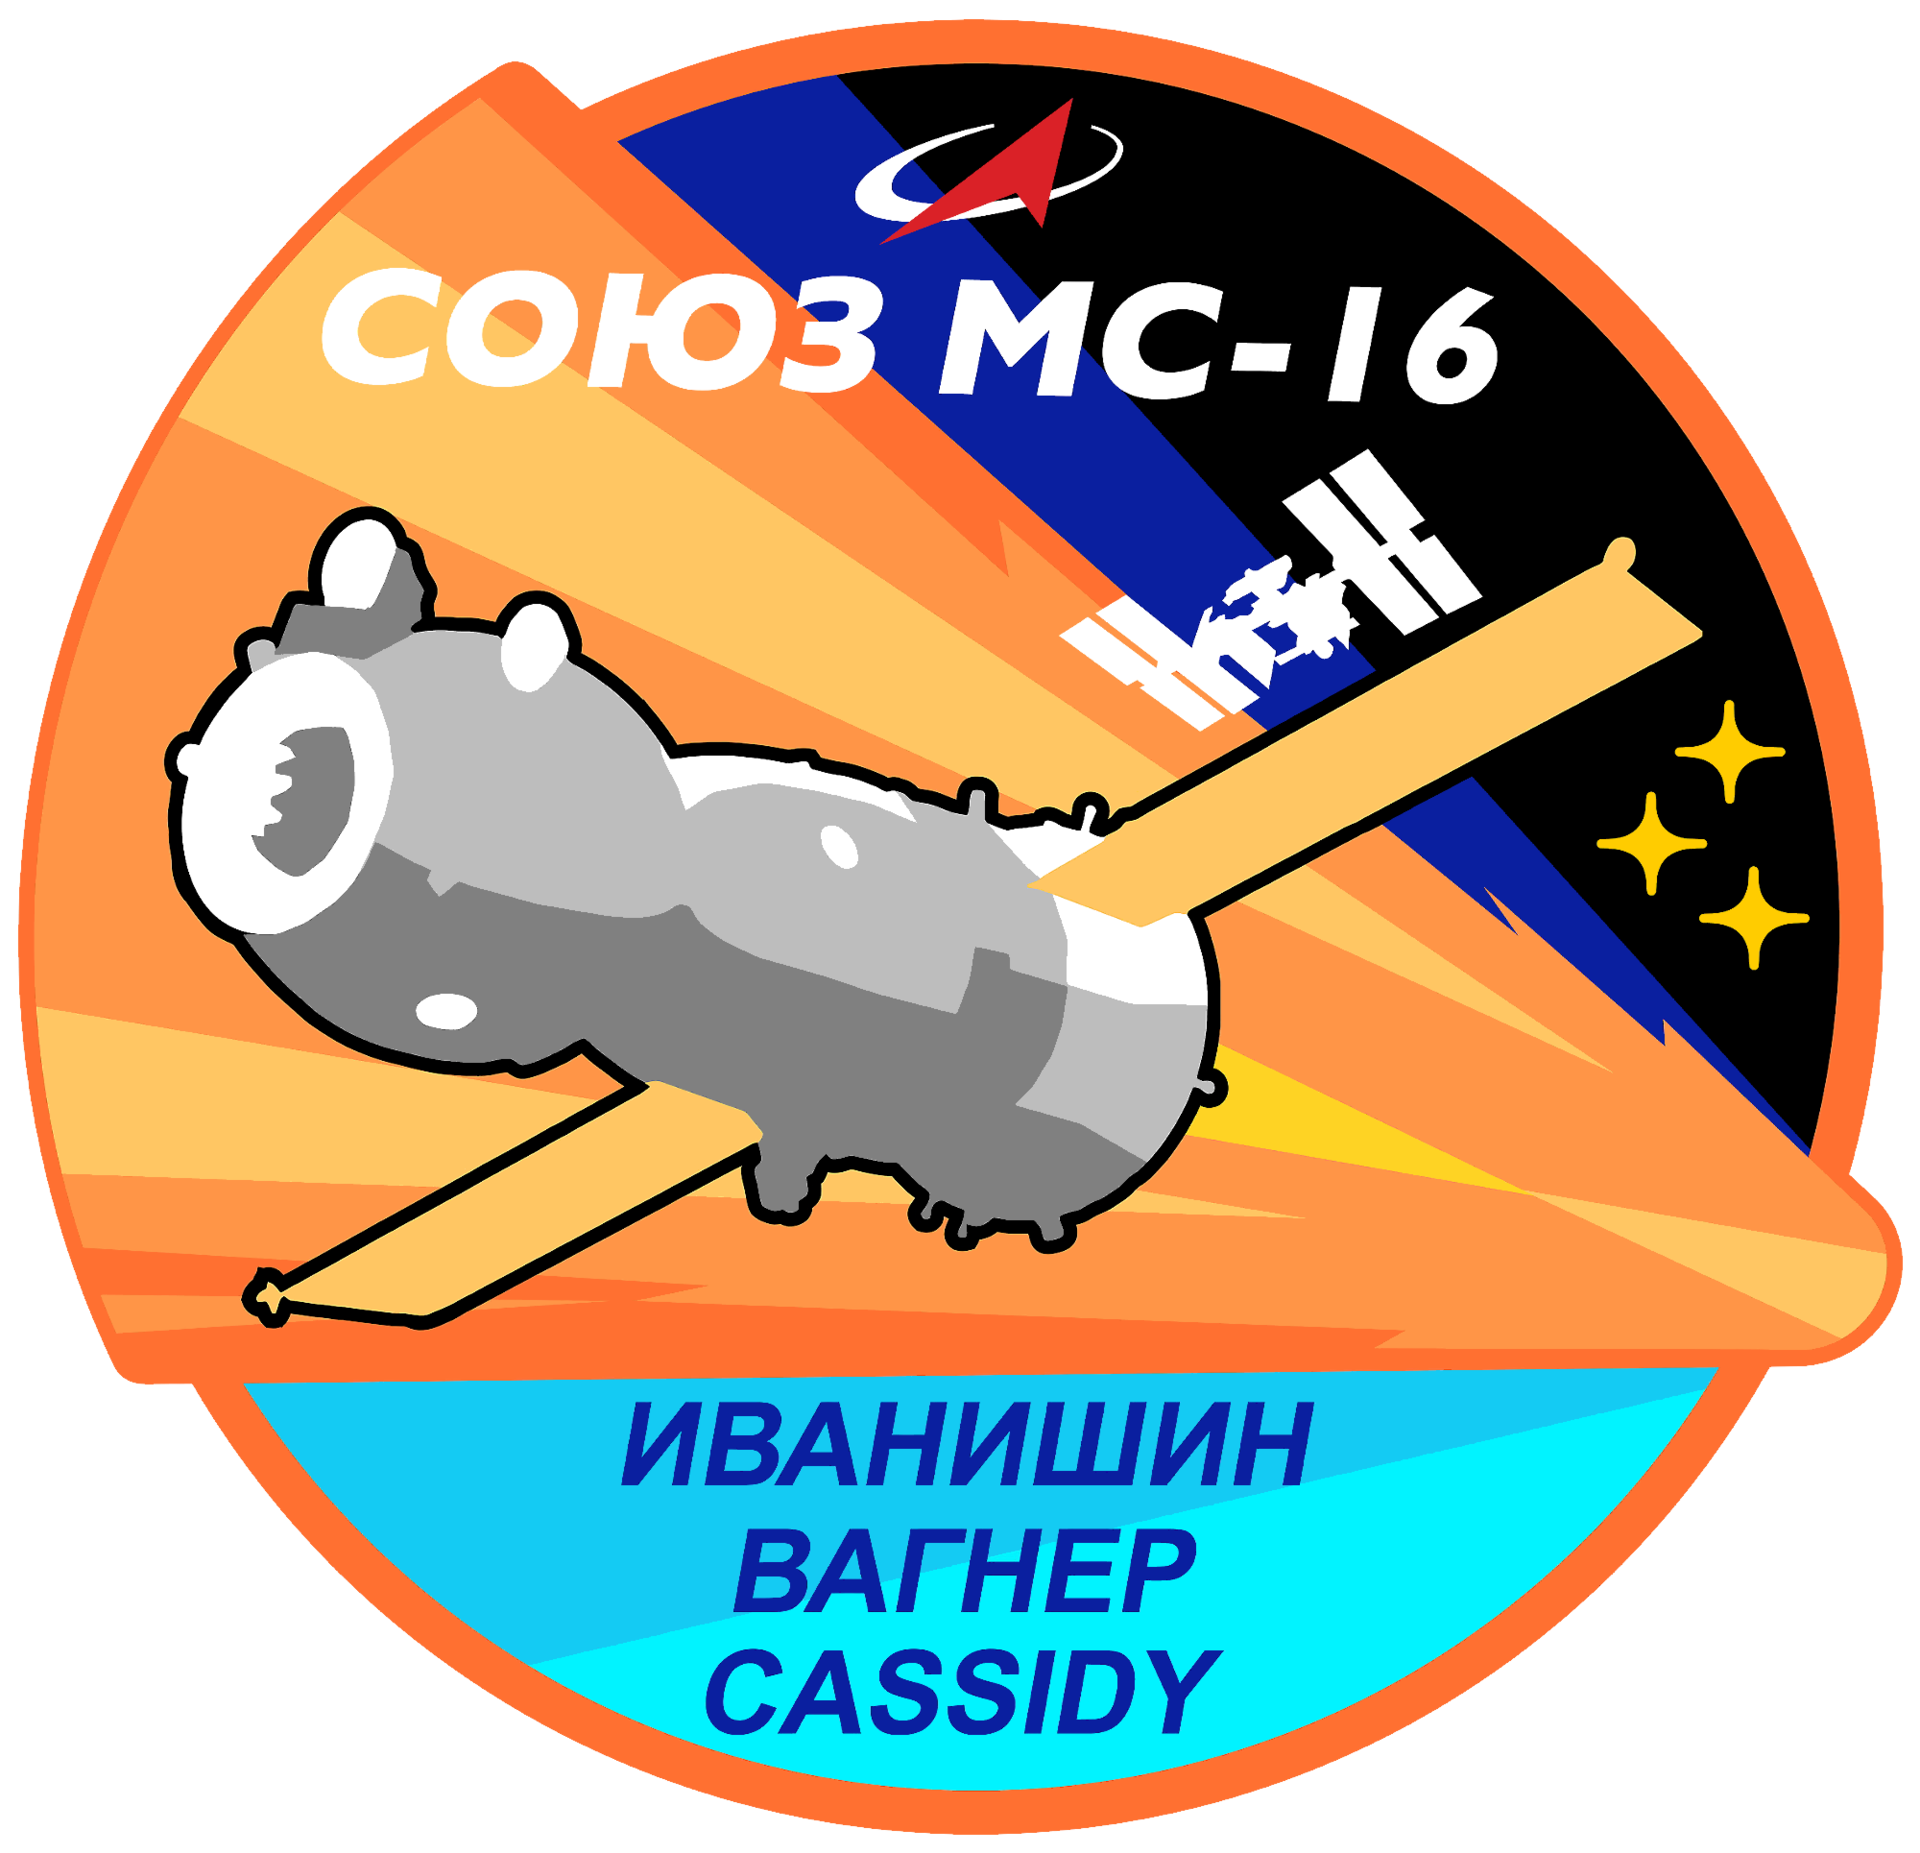 Mission patch for Soyuz MS-16